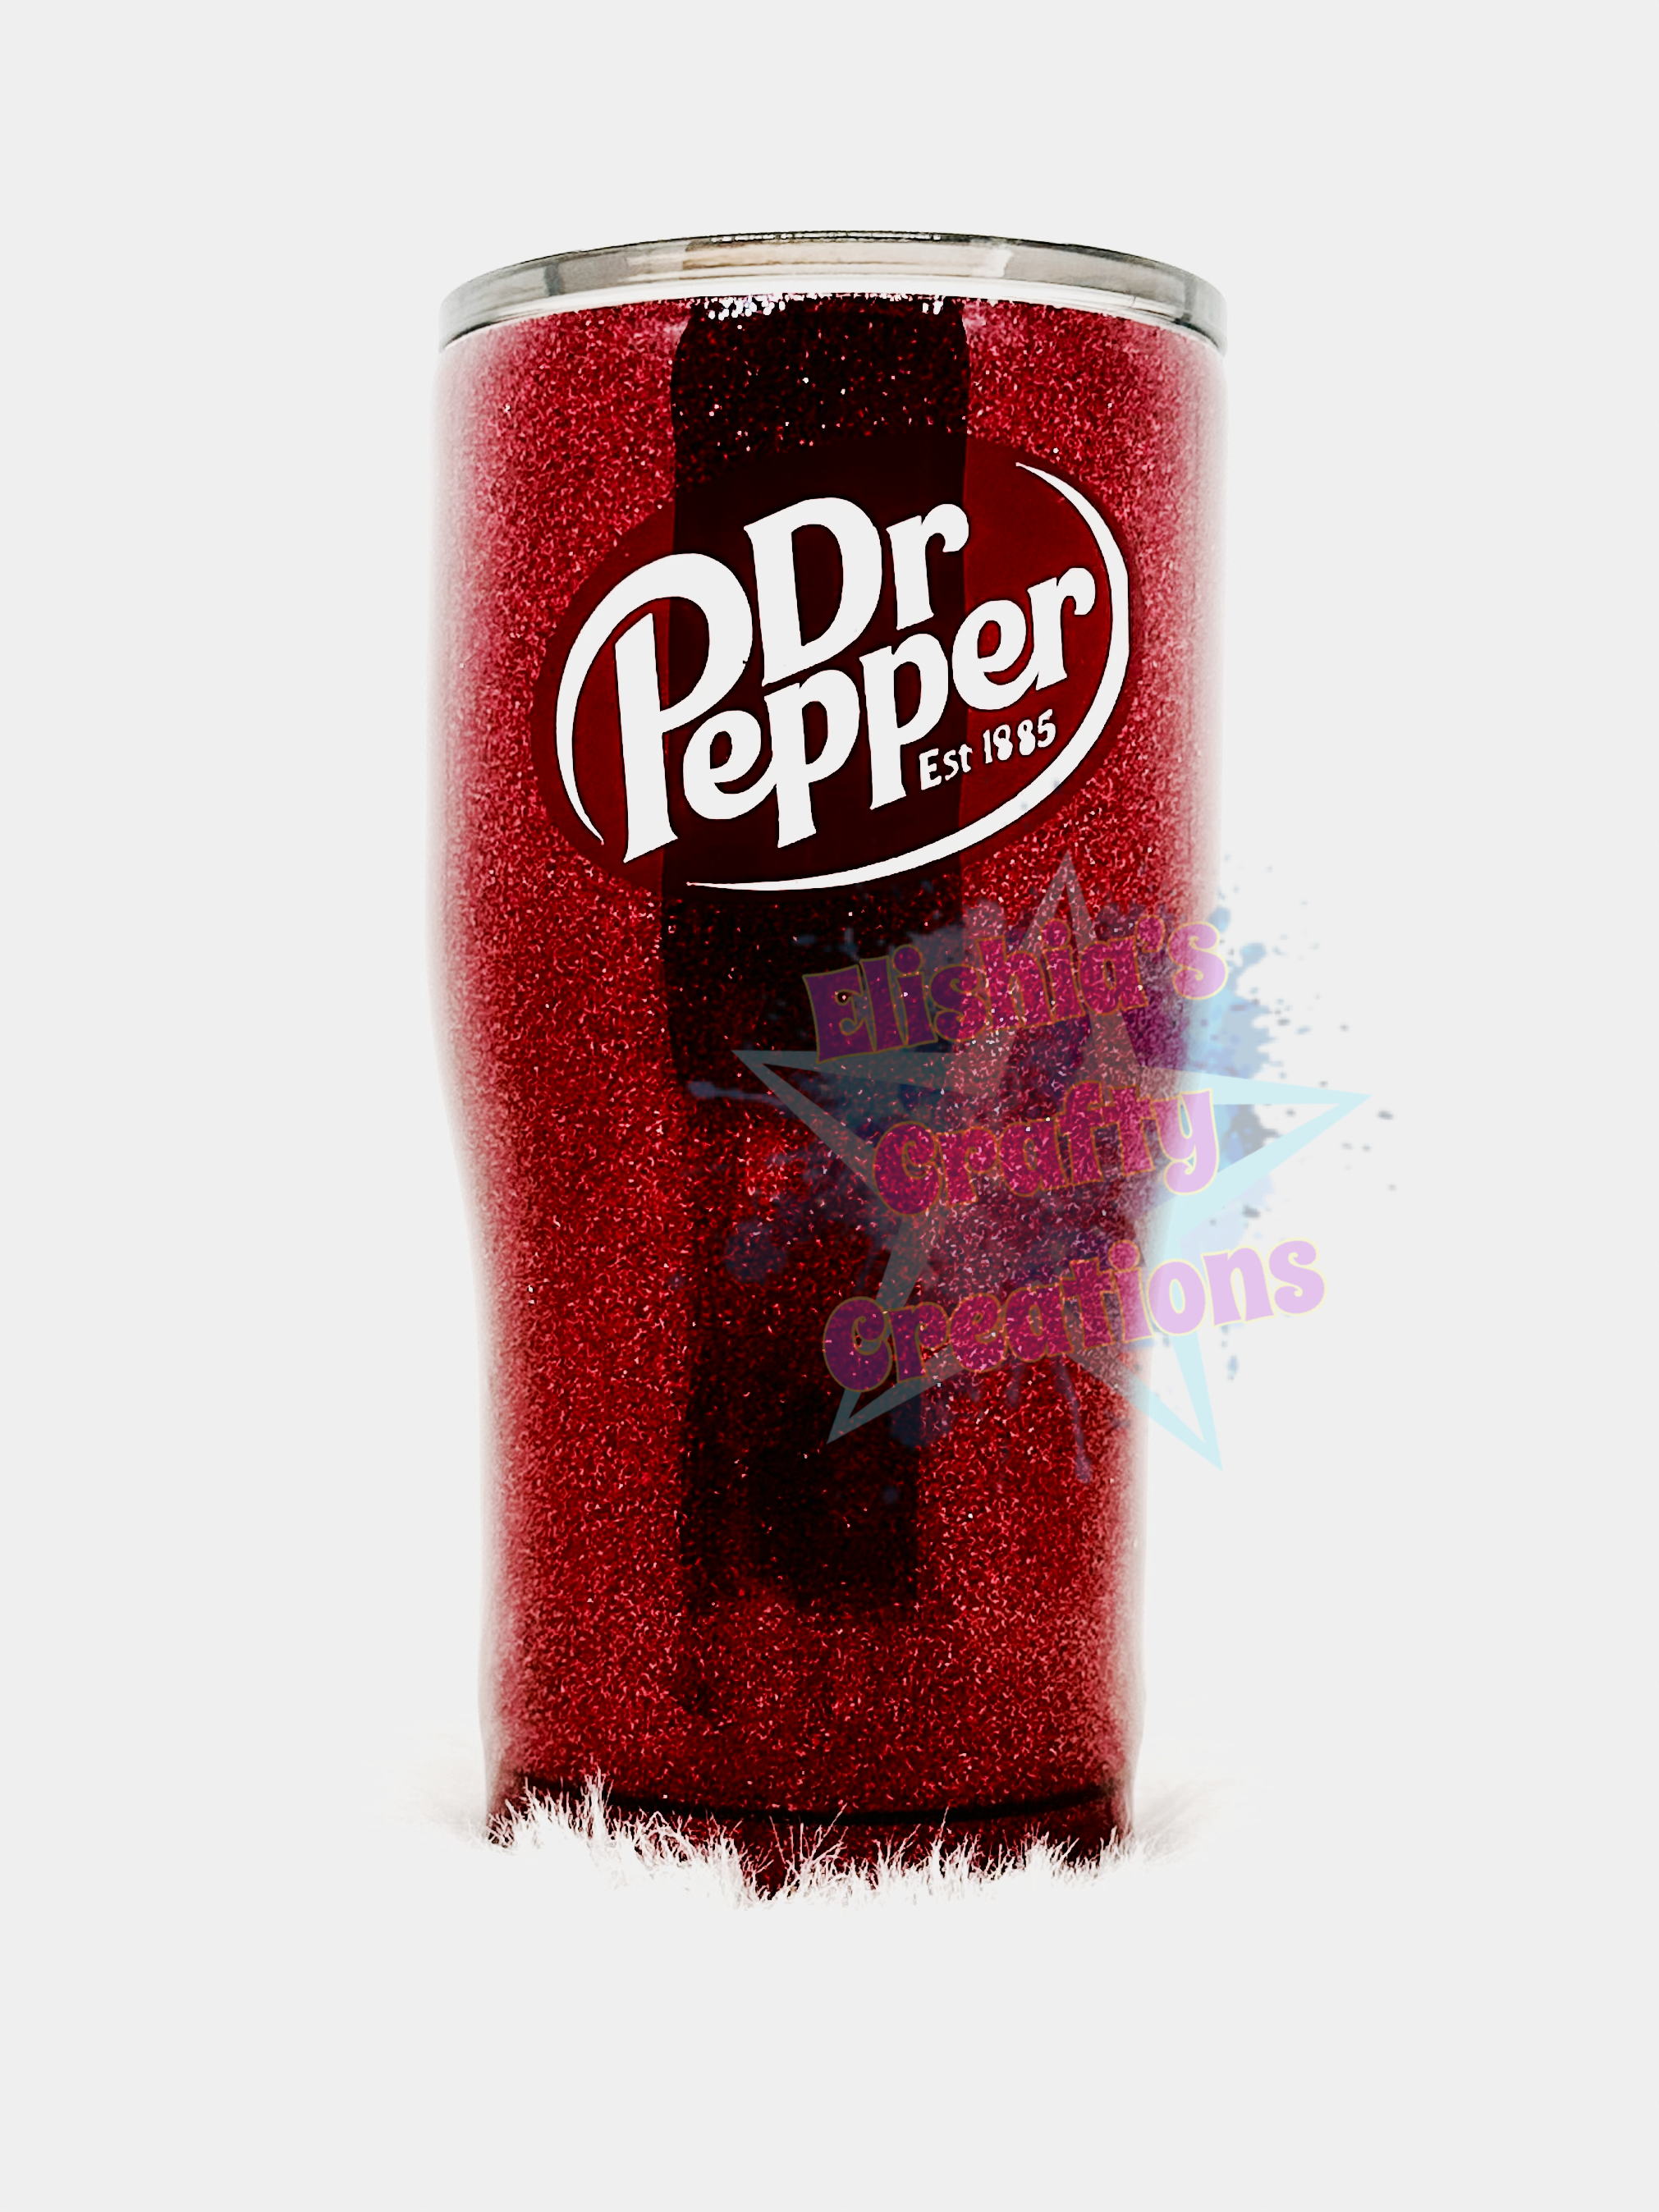 I Only Drink Dr Pepper 3 Days A Week Tumbler Cup - USALast